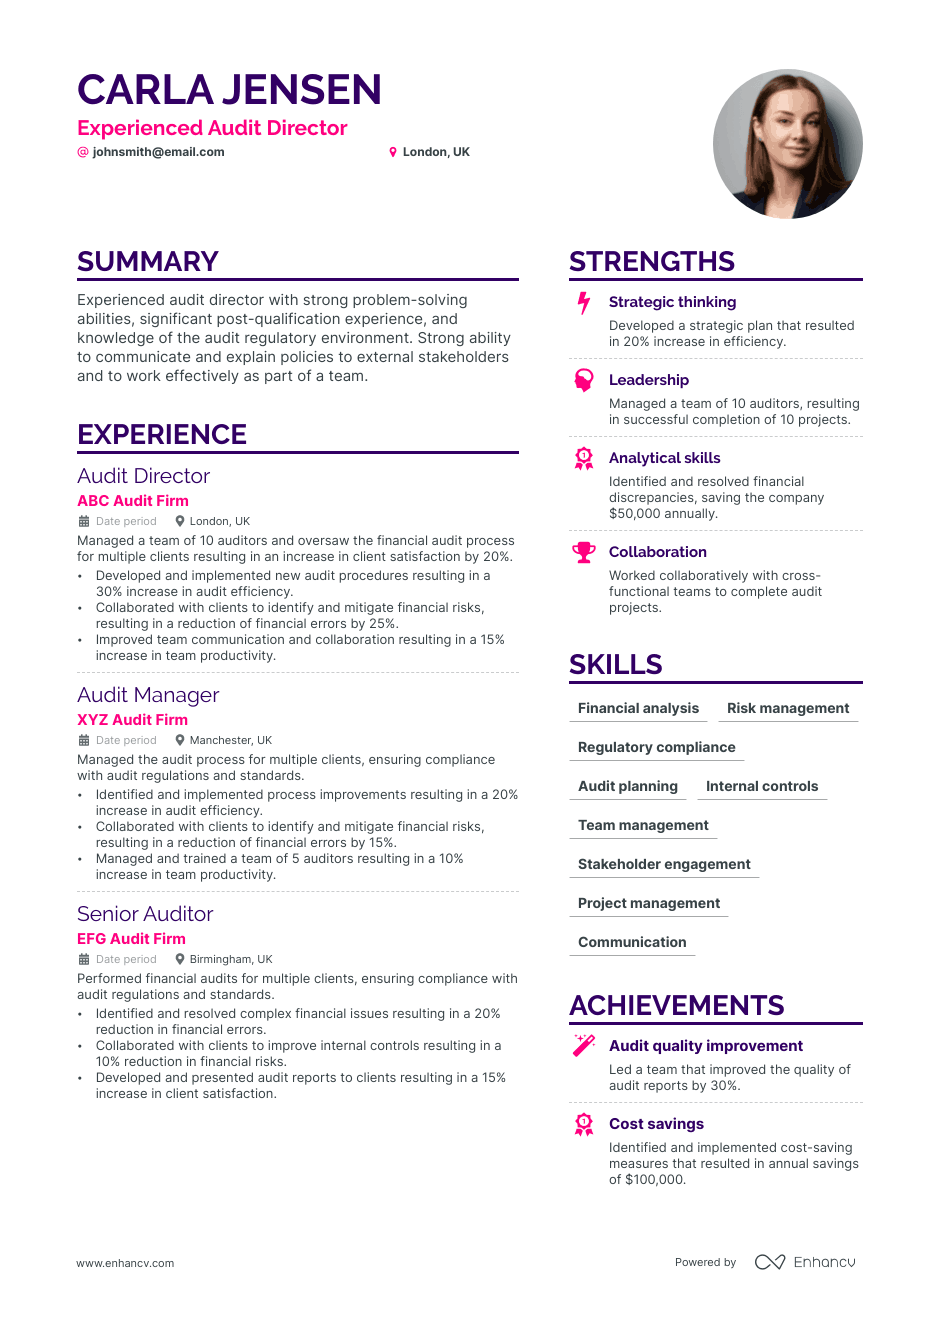 audit director resume example